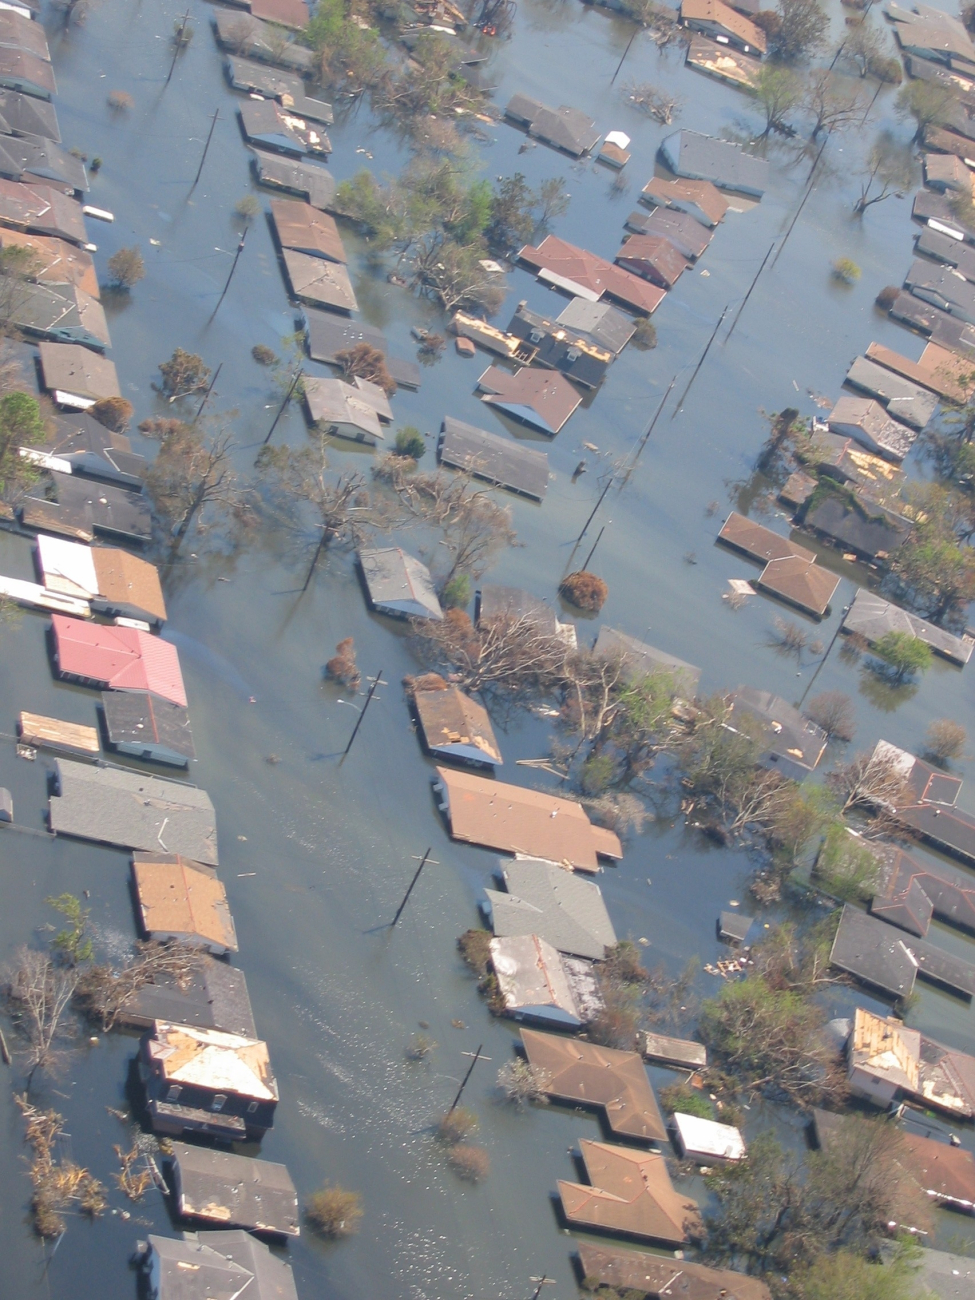 Views of inundated areas in New Orleans following breaking of the leveessurrounding the city as the result of Hurricane Katrina